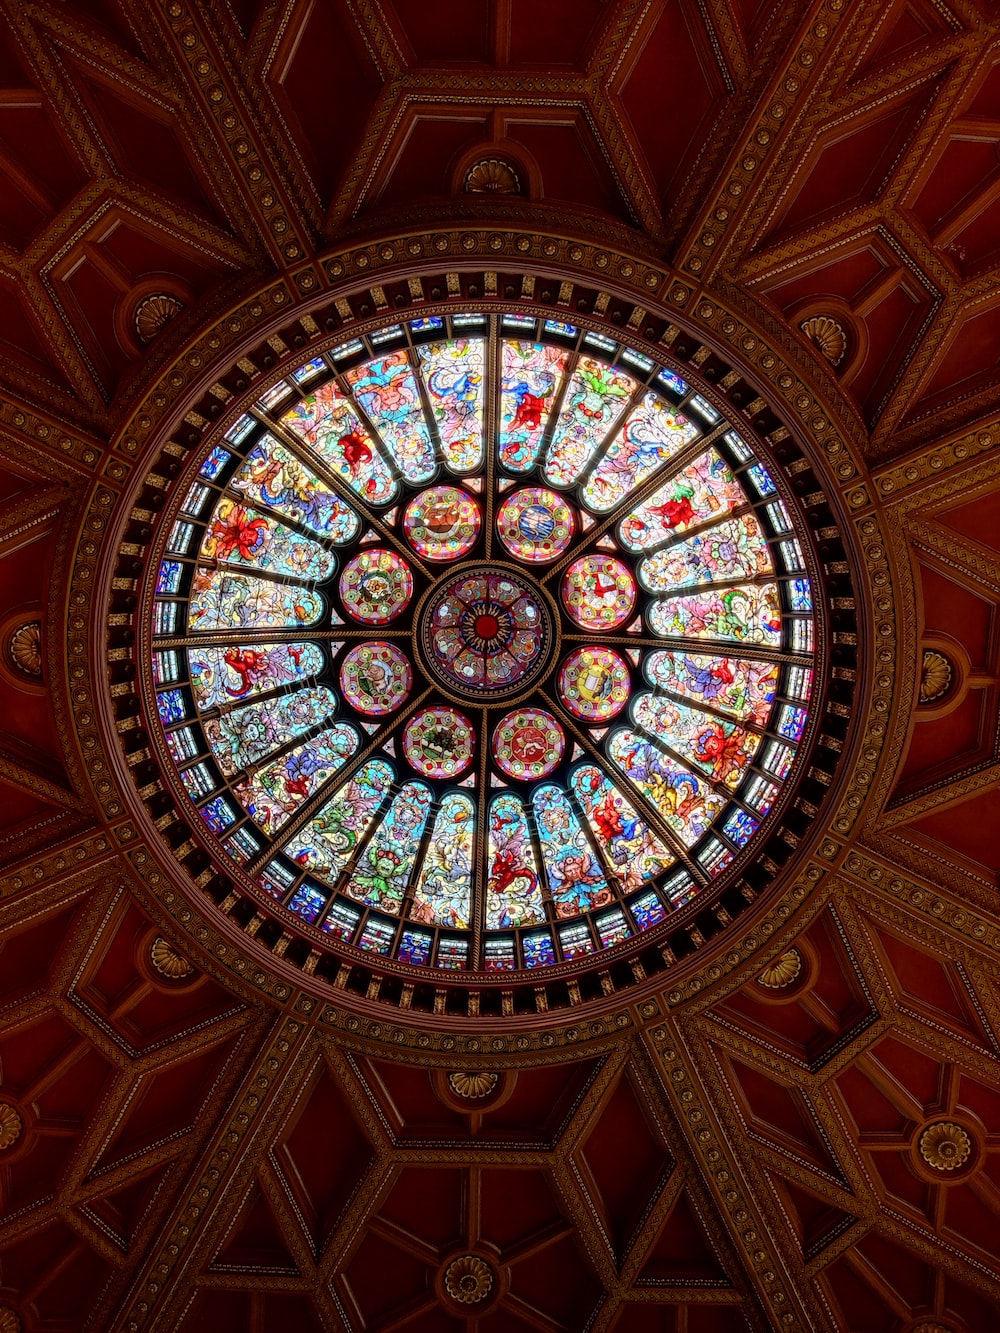 a circular stained glass window in the ceiling of a building